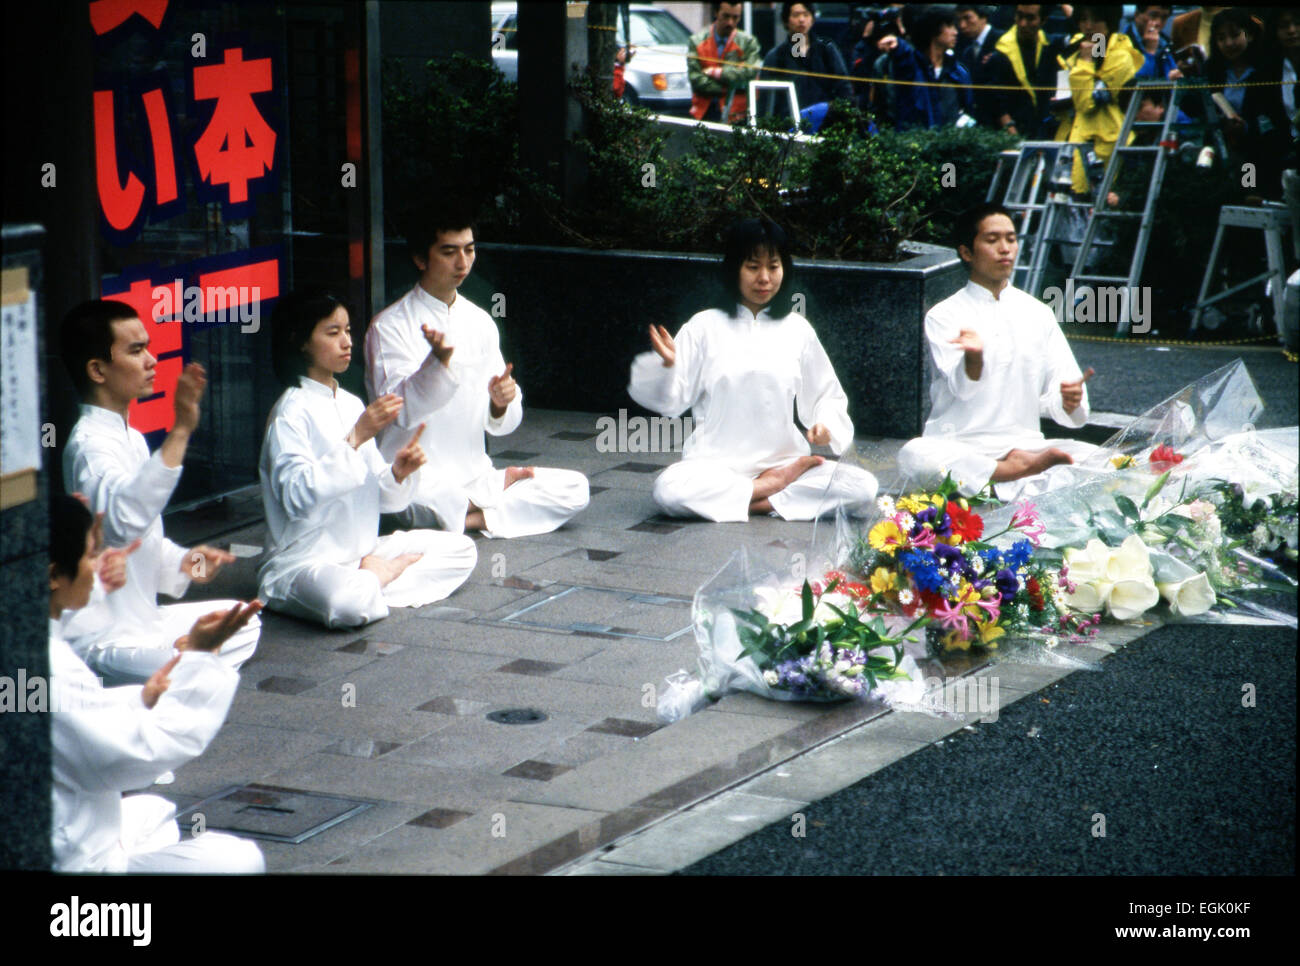 April, 1995, Tokyo, Japan - Members of Aum perform commemorative dance, mourning over the death of Hideo Murai at the cult's headquarters in Tokyo's upscale neighborhood of Aoyama in April 1995. Murai, the head of Aum's ministry of science, was stabbed to death outside the headquarters by a Korean member of the nation's biggest mob group Yamaguchi-gumi. © Haruyoshi Yamaguchi/AFLO/Alamy Live News Stock Photo